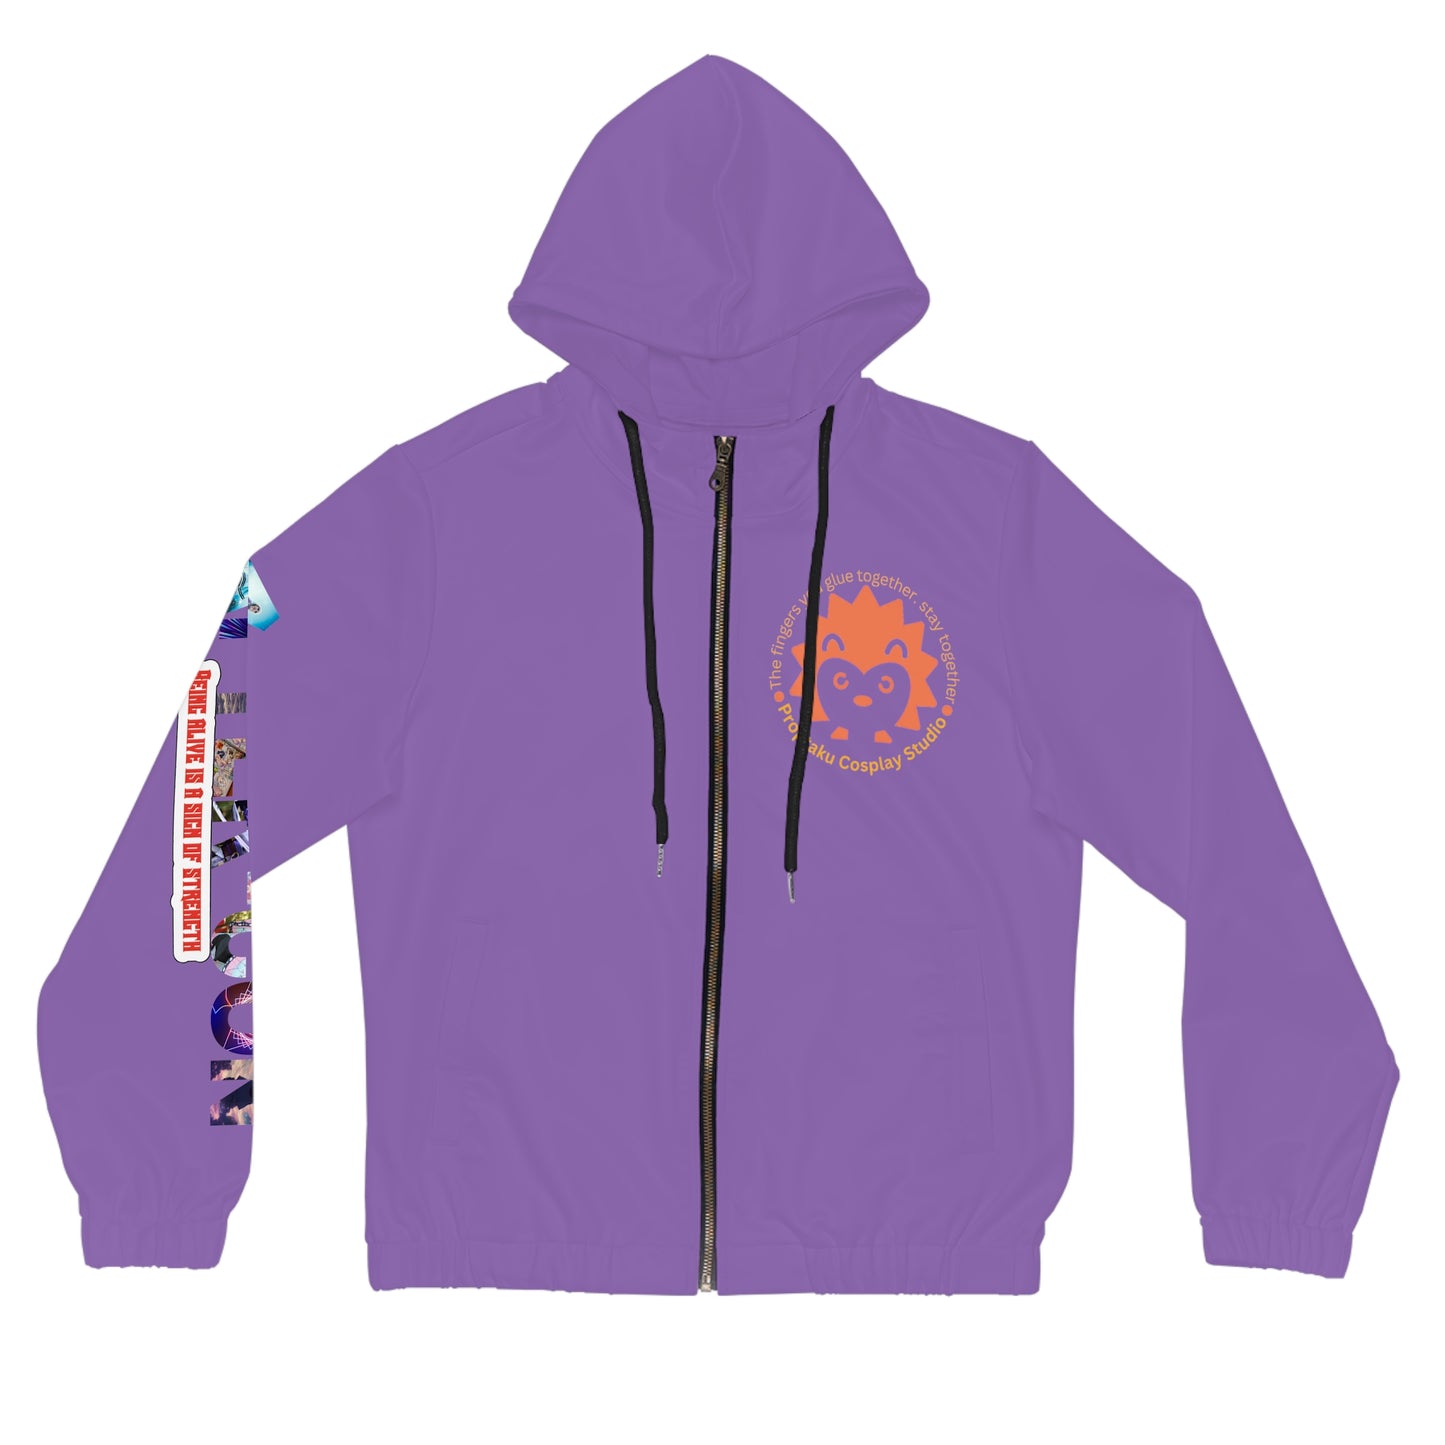 After-Con - "Just A Whisper" Women’s Full-Zip Hoodie